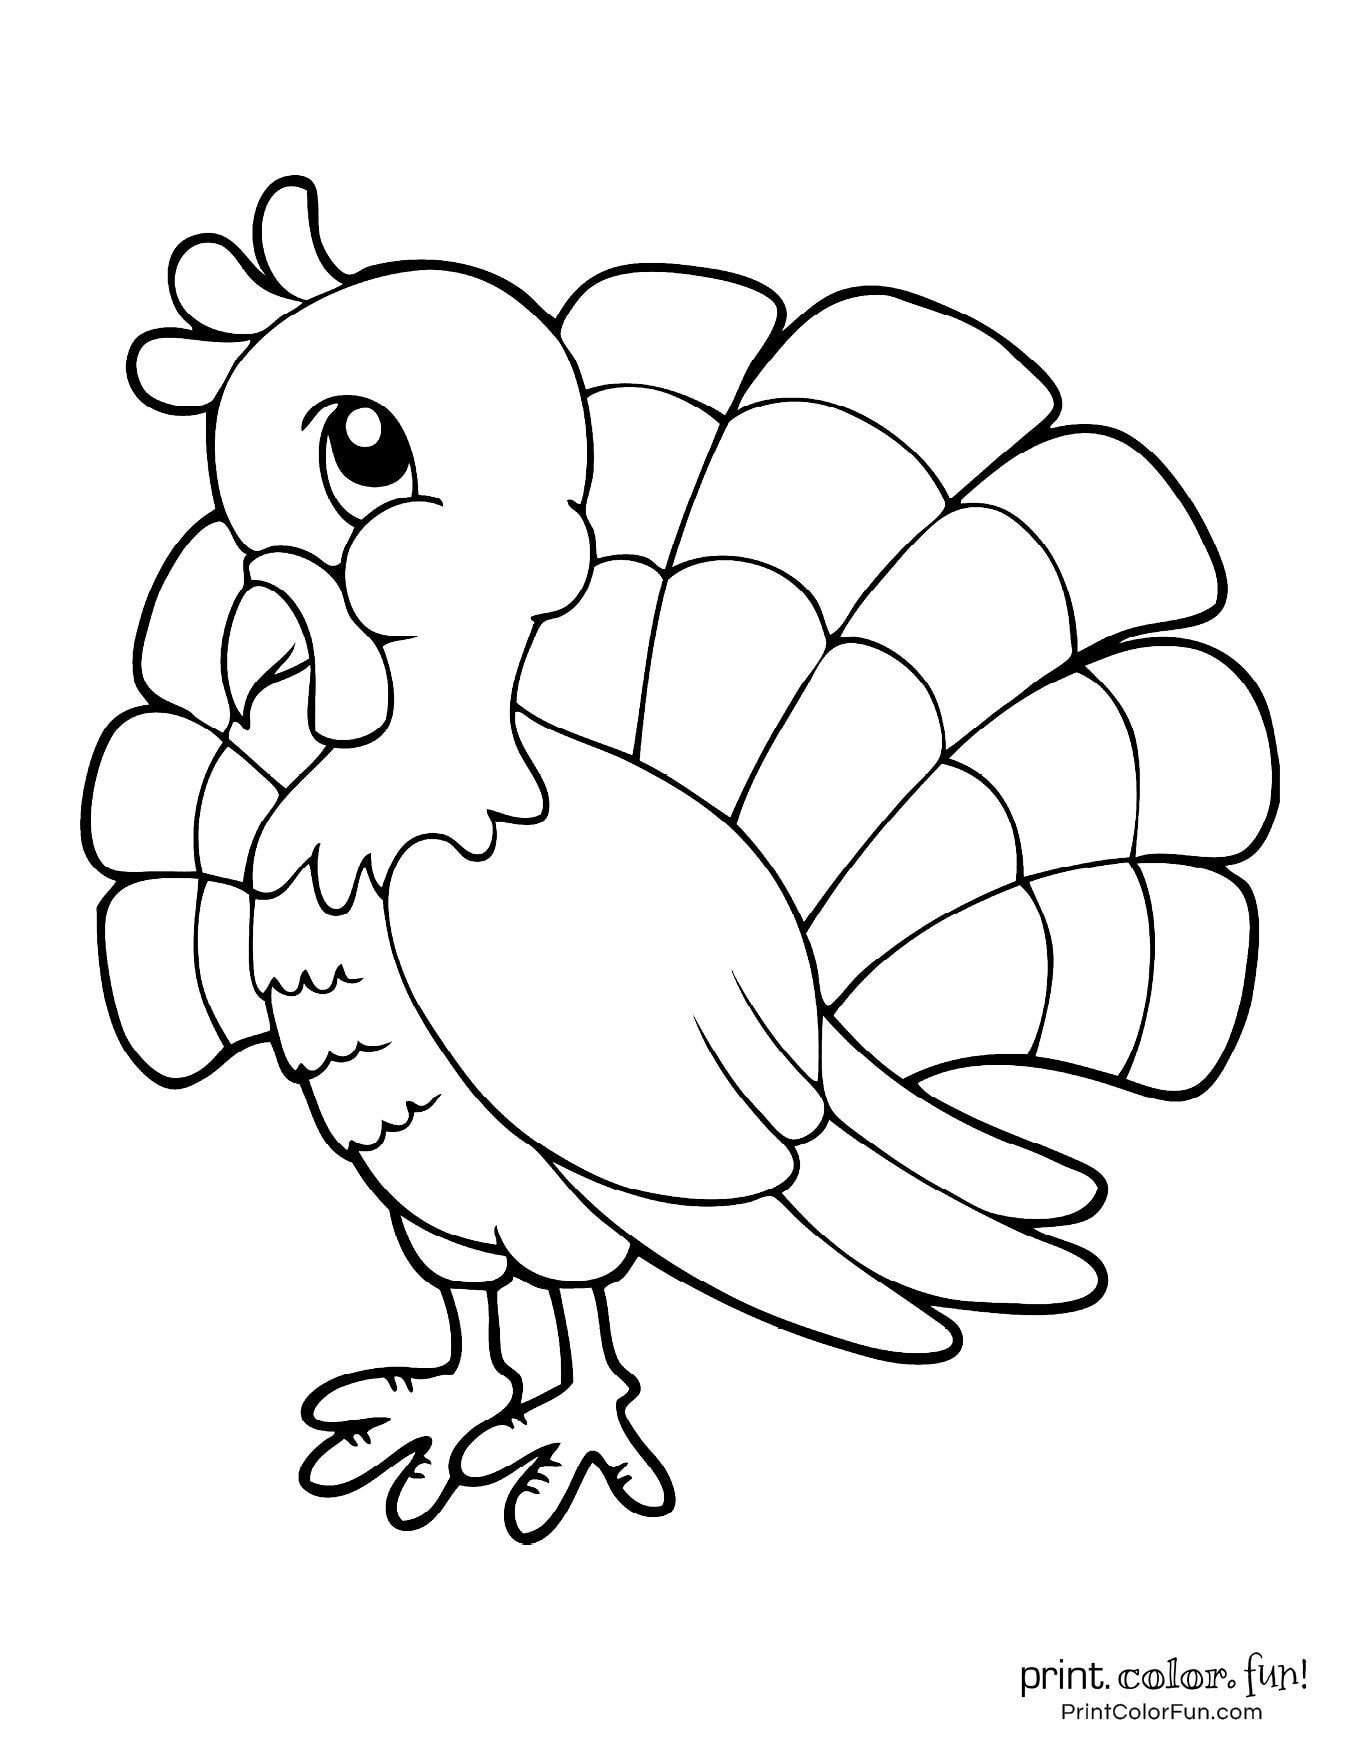 Terrific thanksgiving turkey coloring pages for some free printable holiday fun at printcolorfun